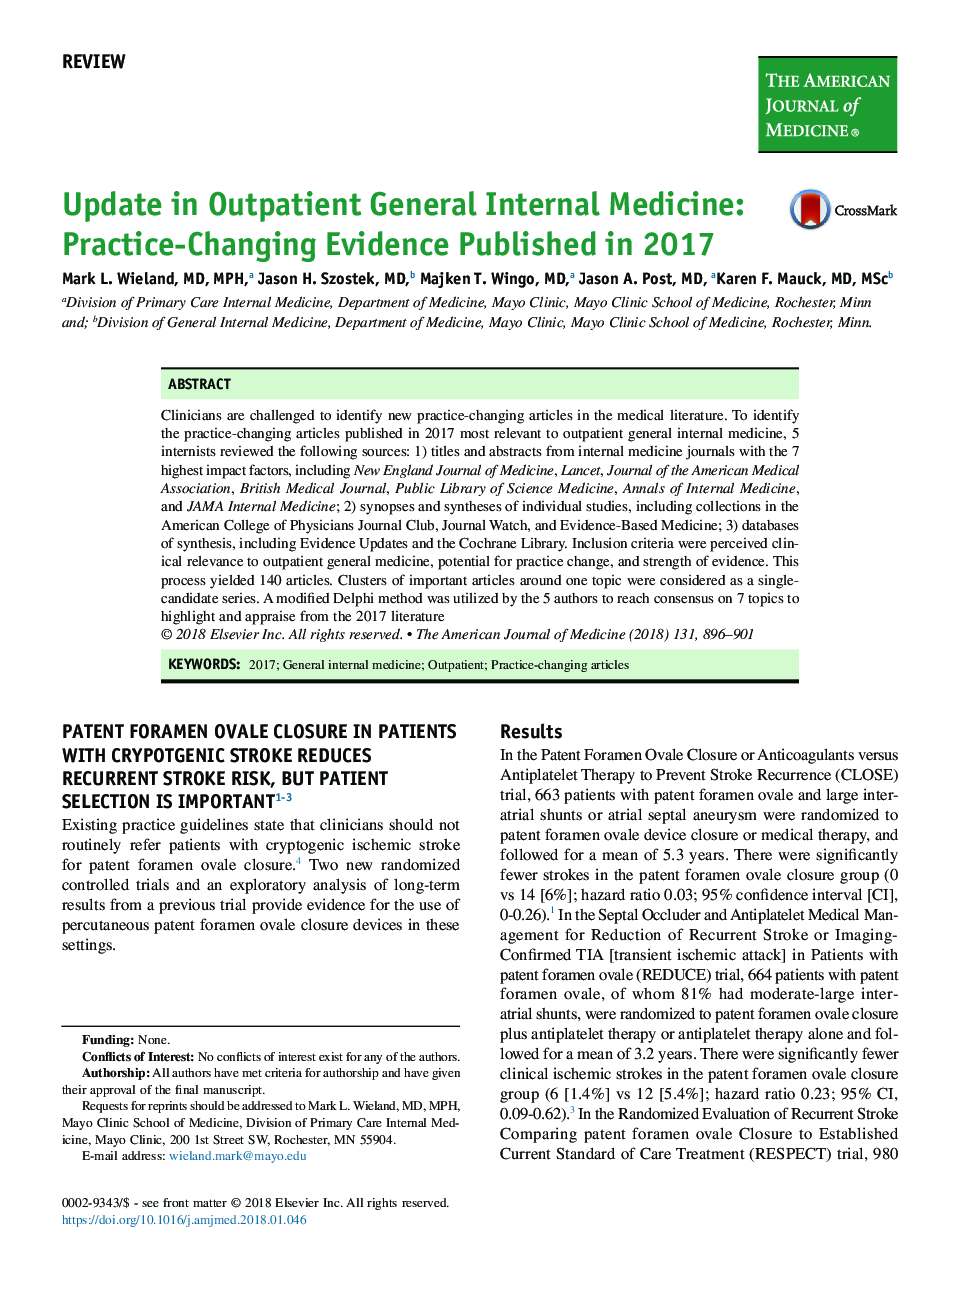 Update in Outpatient General Internal Medicine: Practice-Changing Evidence Published in 2017